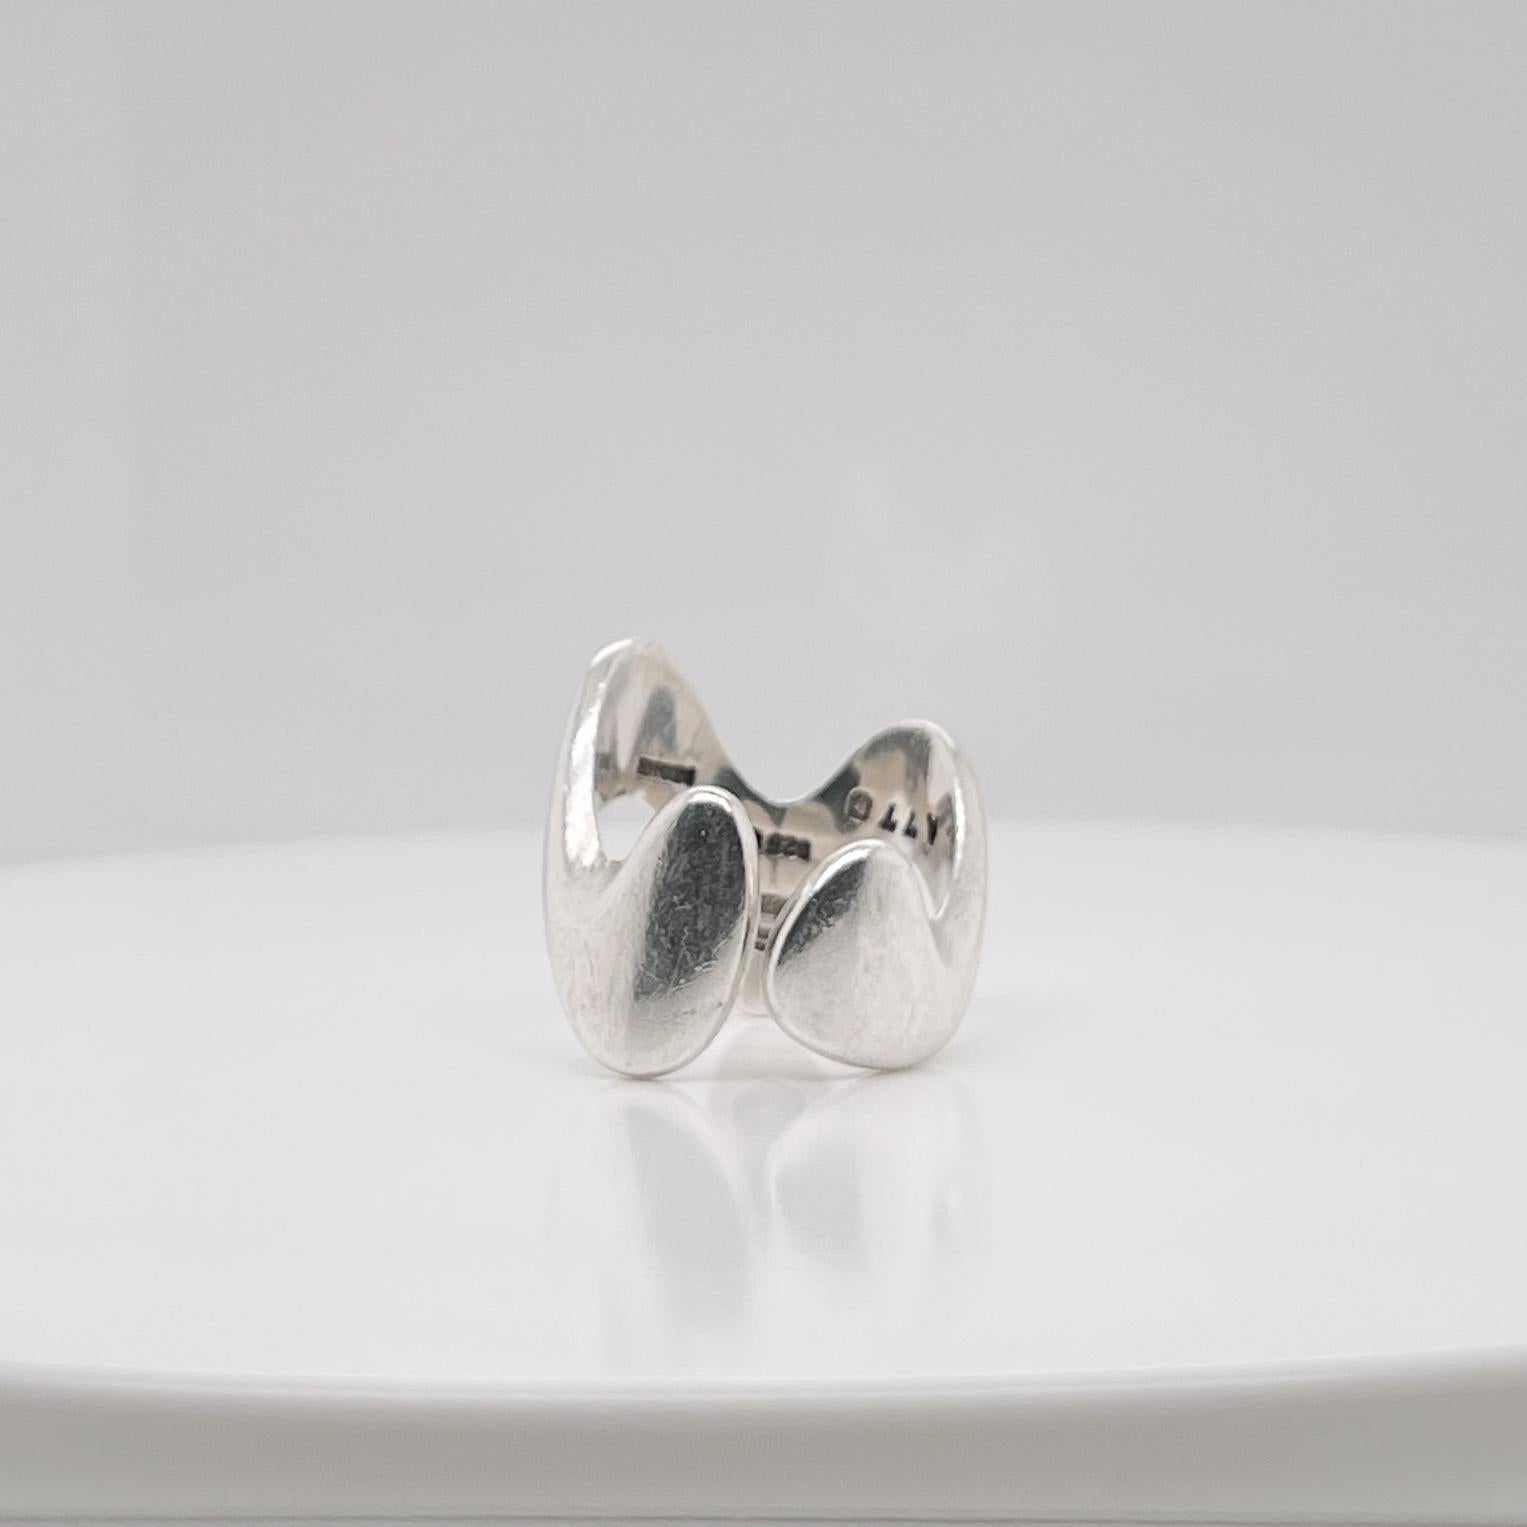 Modernist Georg Jensen Sterling Silver Ring Model No. A 77 B by Ole Ishøj In Fair Condition For Sale In Philadelphia, PA